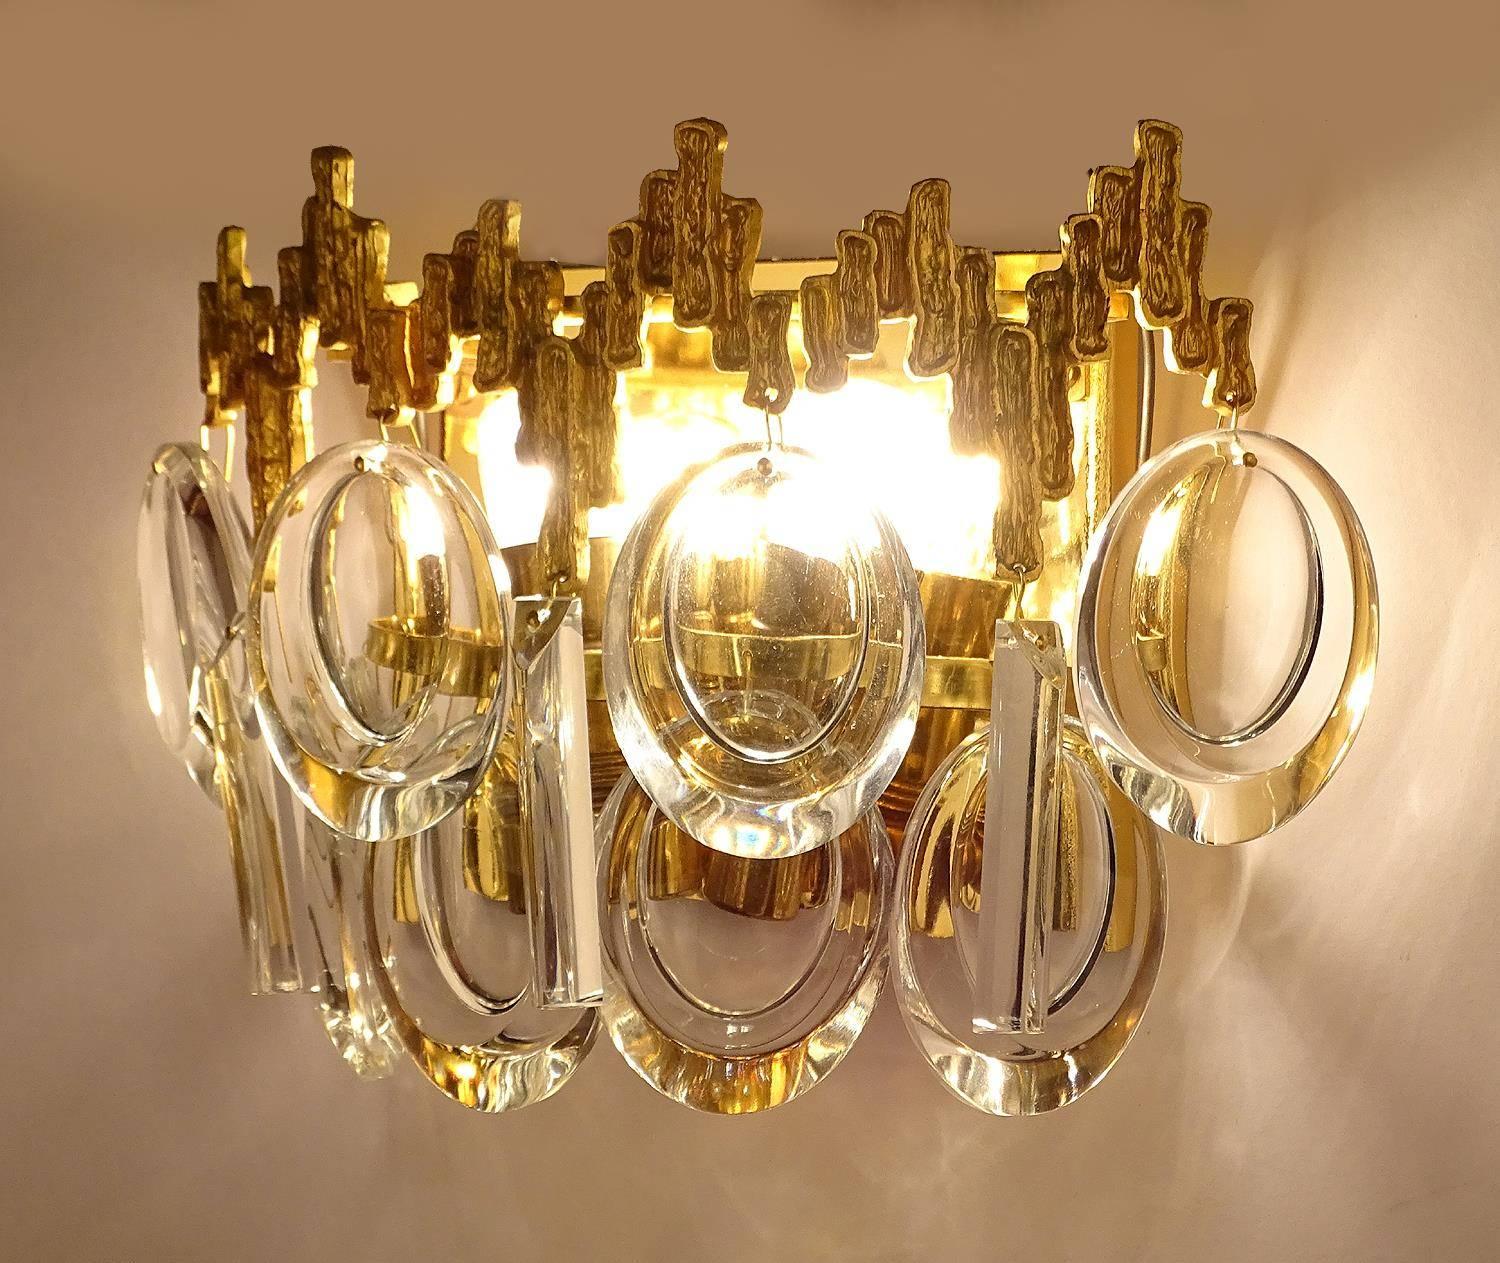 Exceptionnal  pair of vintage Mid-Century  sconces by Palwa. The lights feature a gilded base with a stupendous  tiara style crest with brutalist trim and and 2 rows of  creole style crystals,  models which were produced in extremely small output